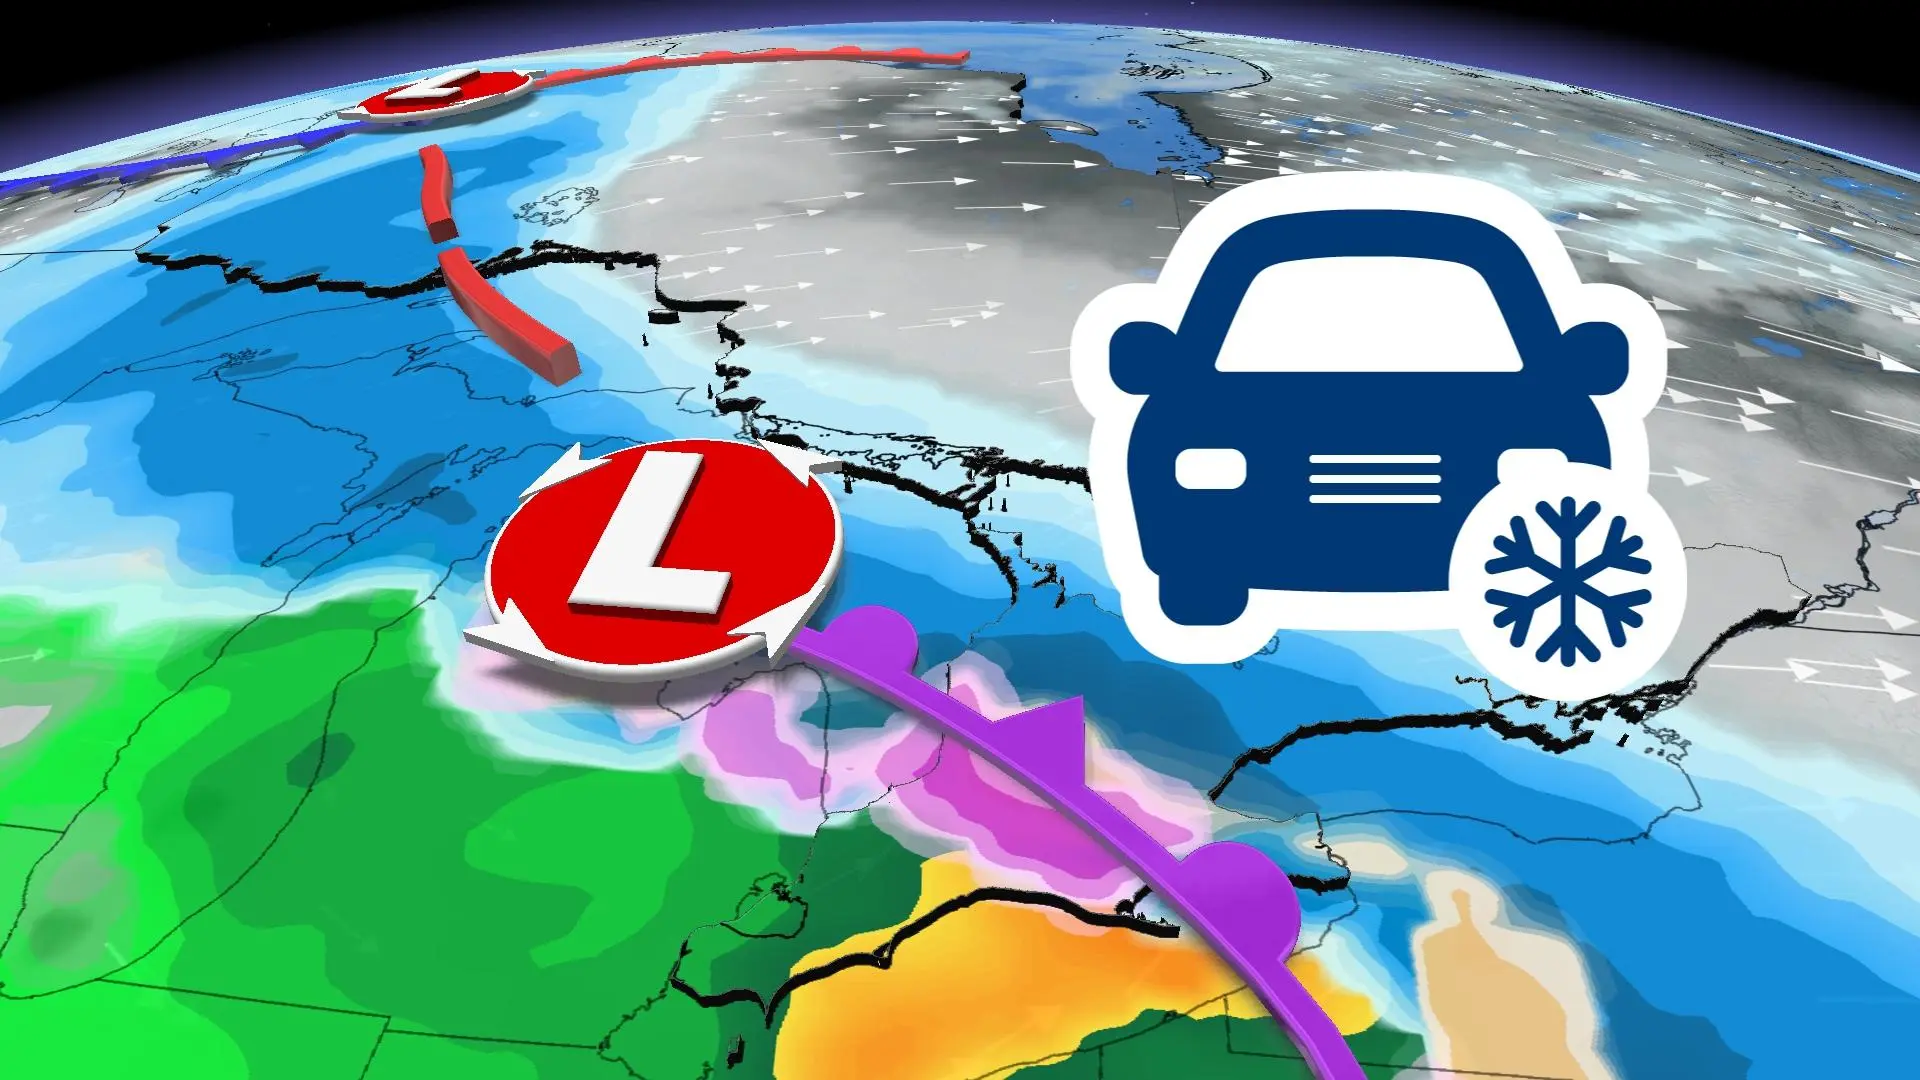 Stay alert: Another impactful storm eyeing Ontario early next week